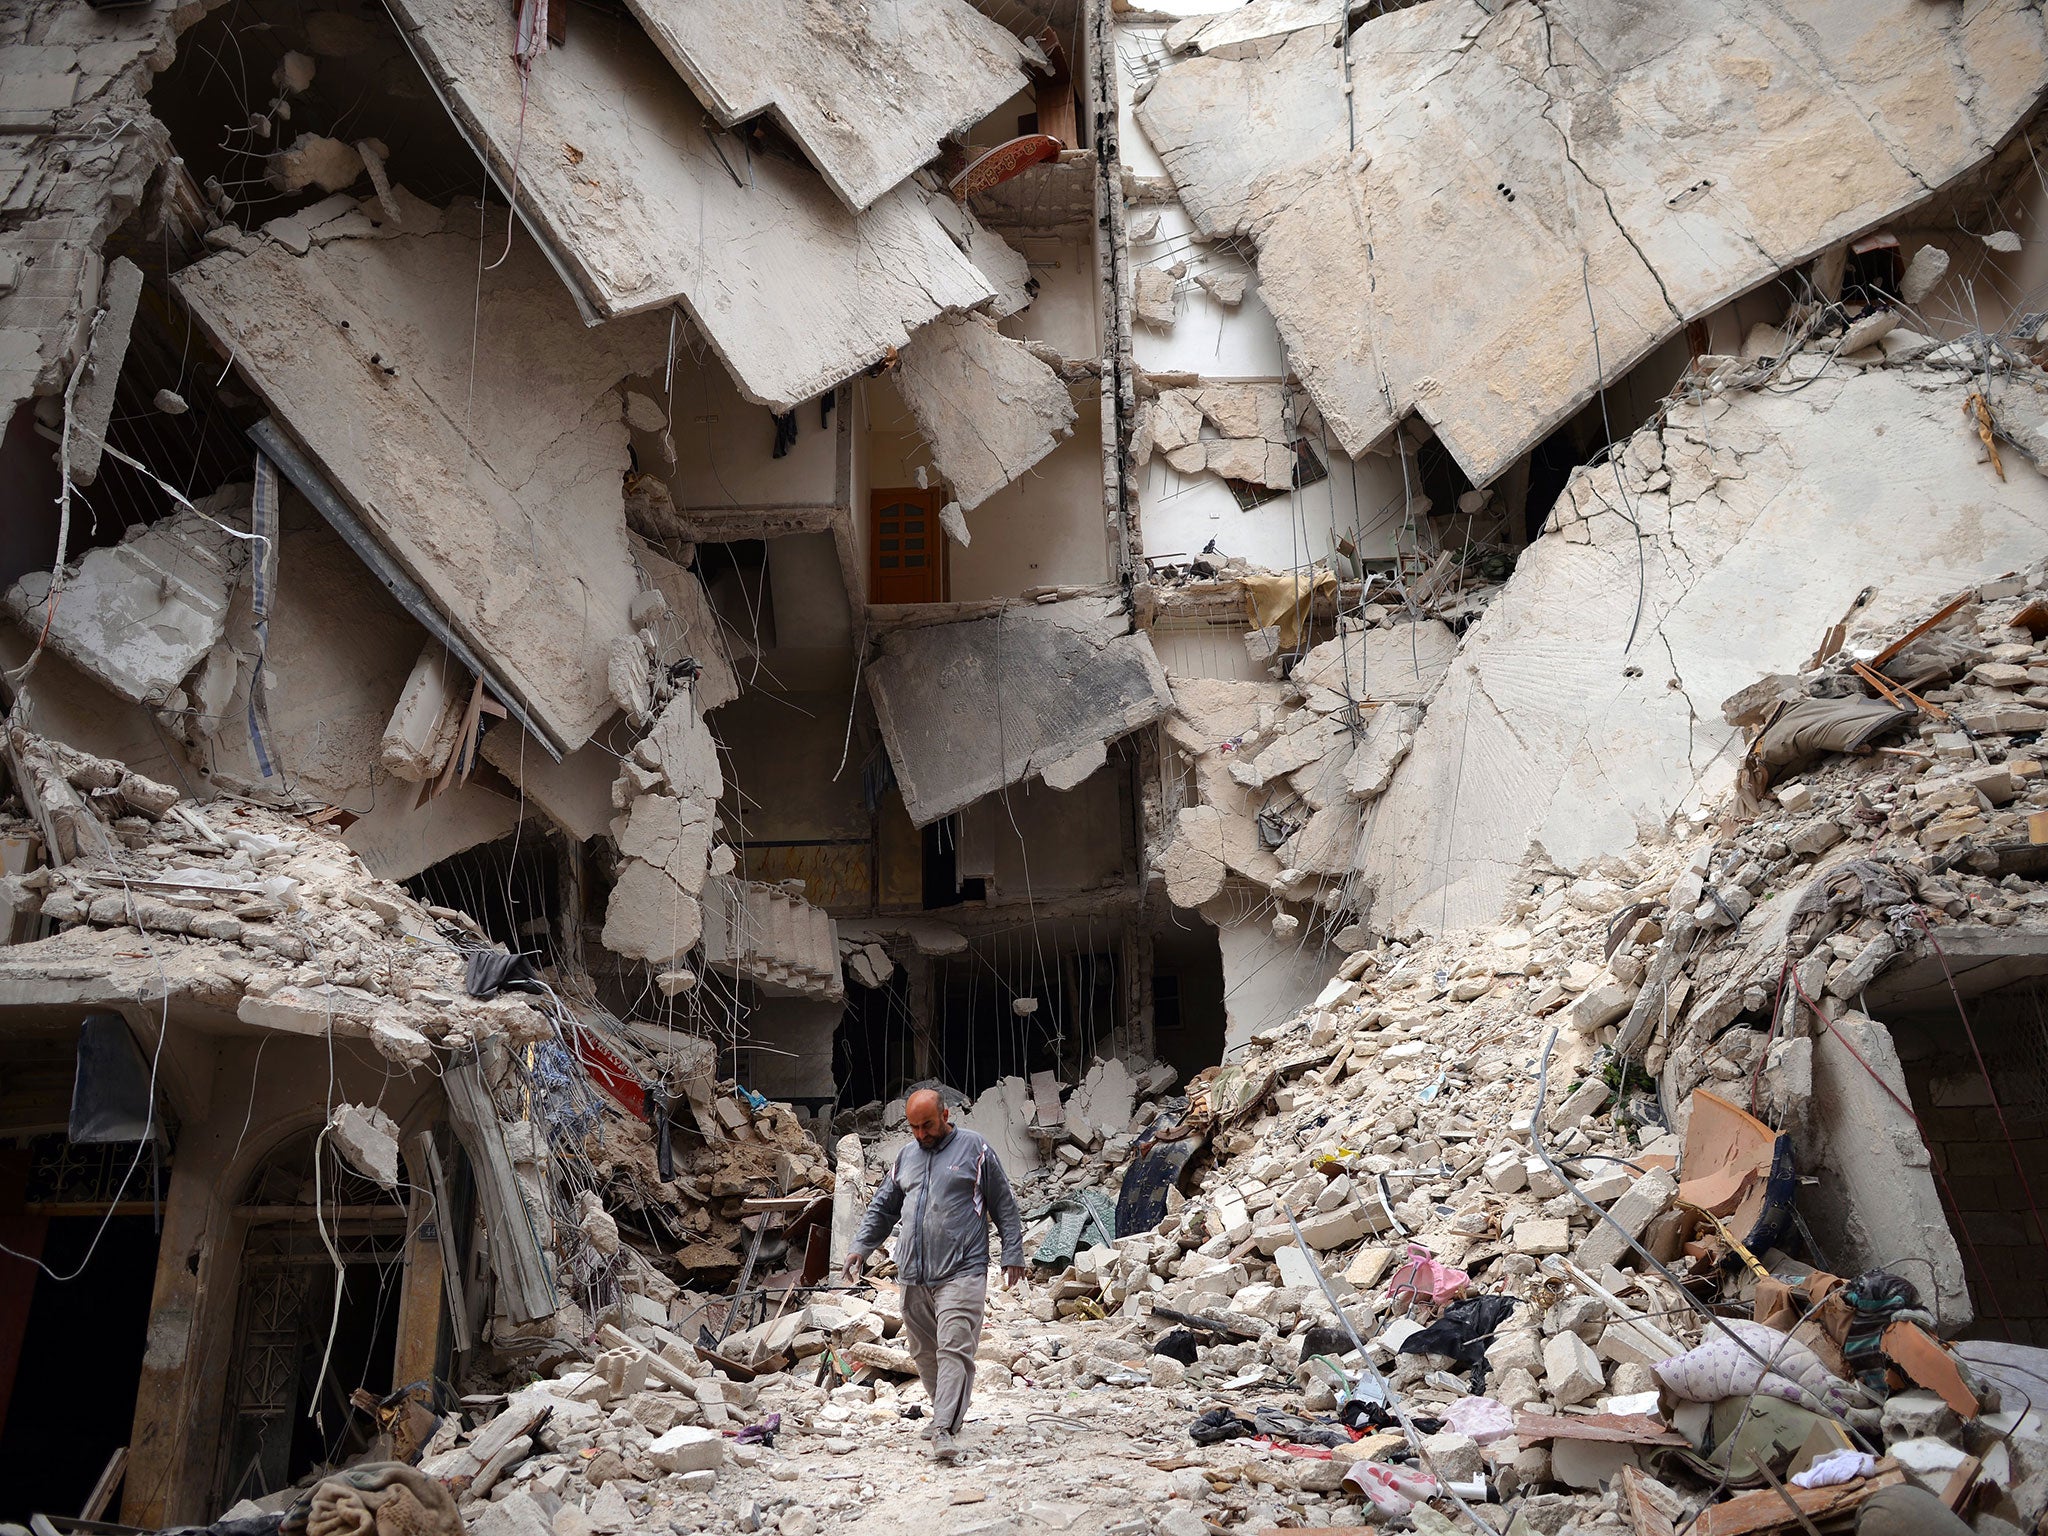 A Syrian man walks amid destruction in the northern Syrian city of Aleppo on April 10, 2013.